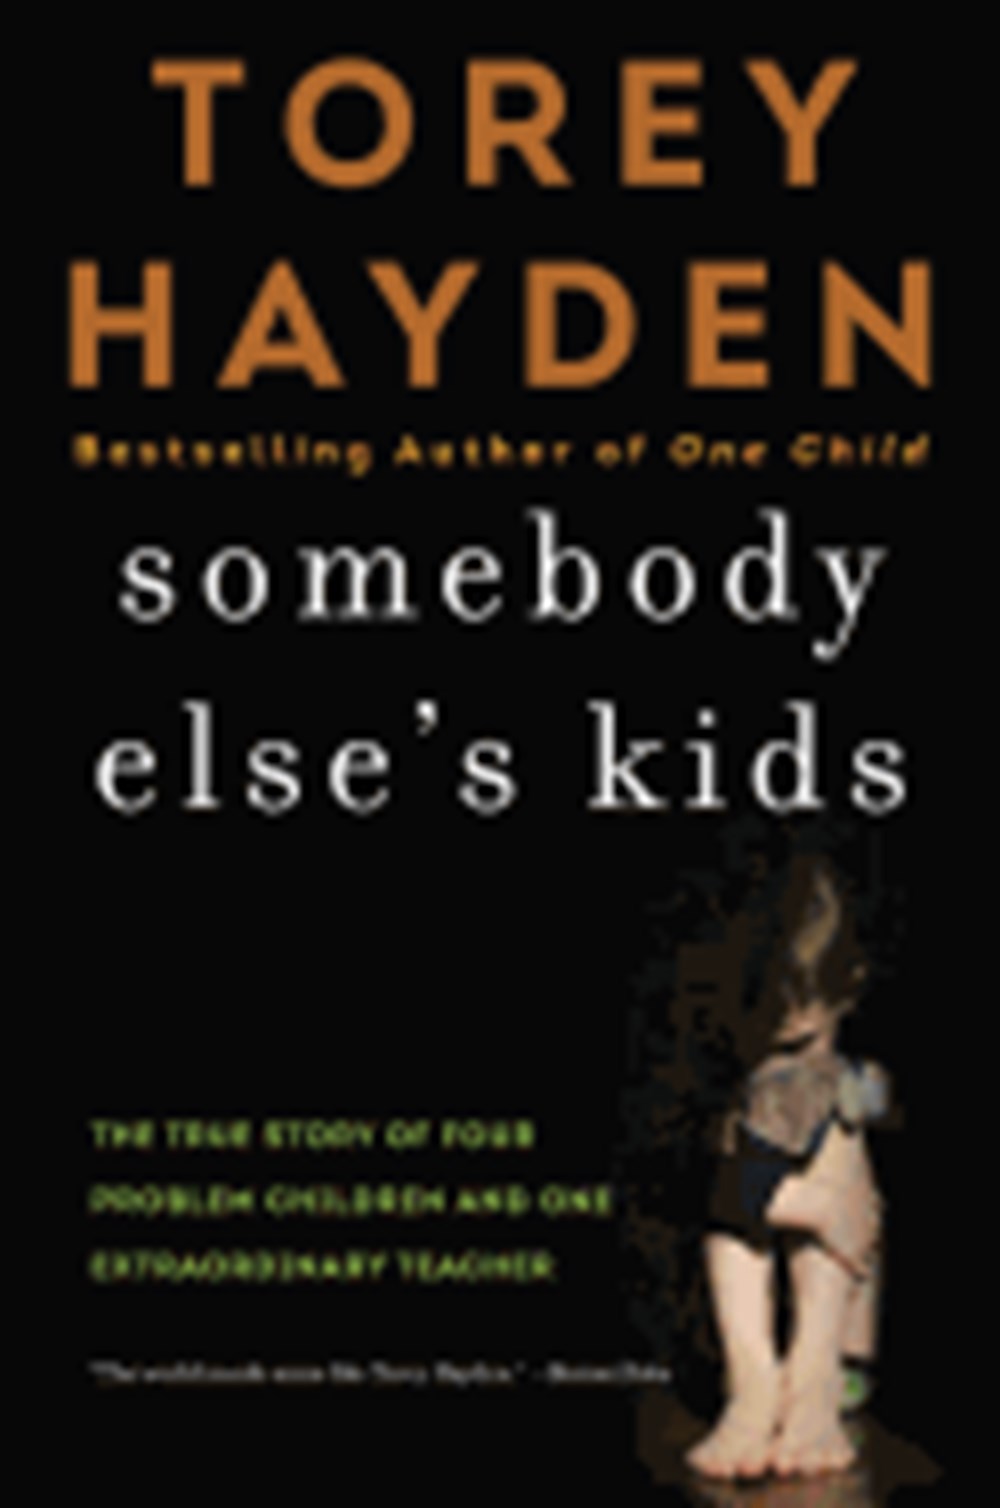 Somebody Else's Kids: The True Story of Four Problem Children and One Extraordinary Teacher